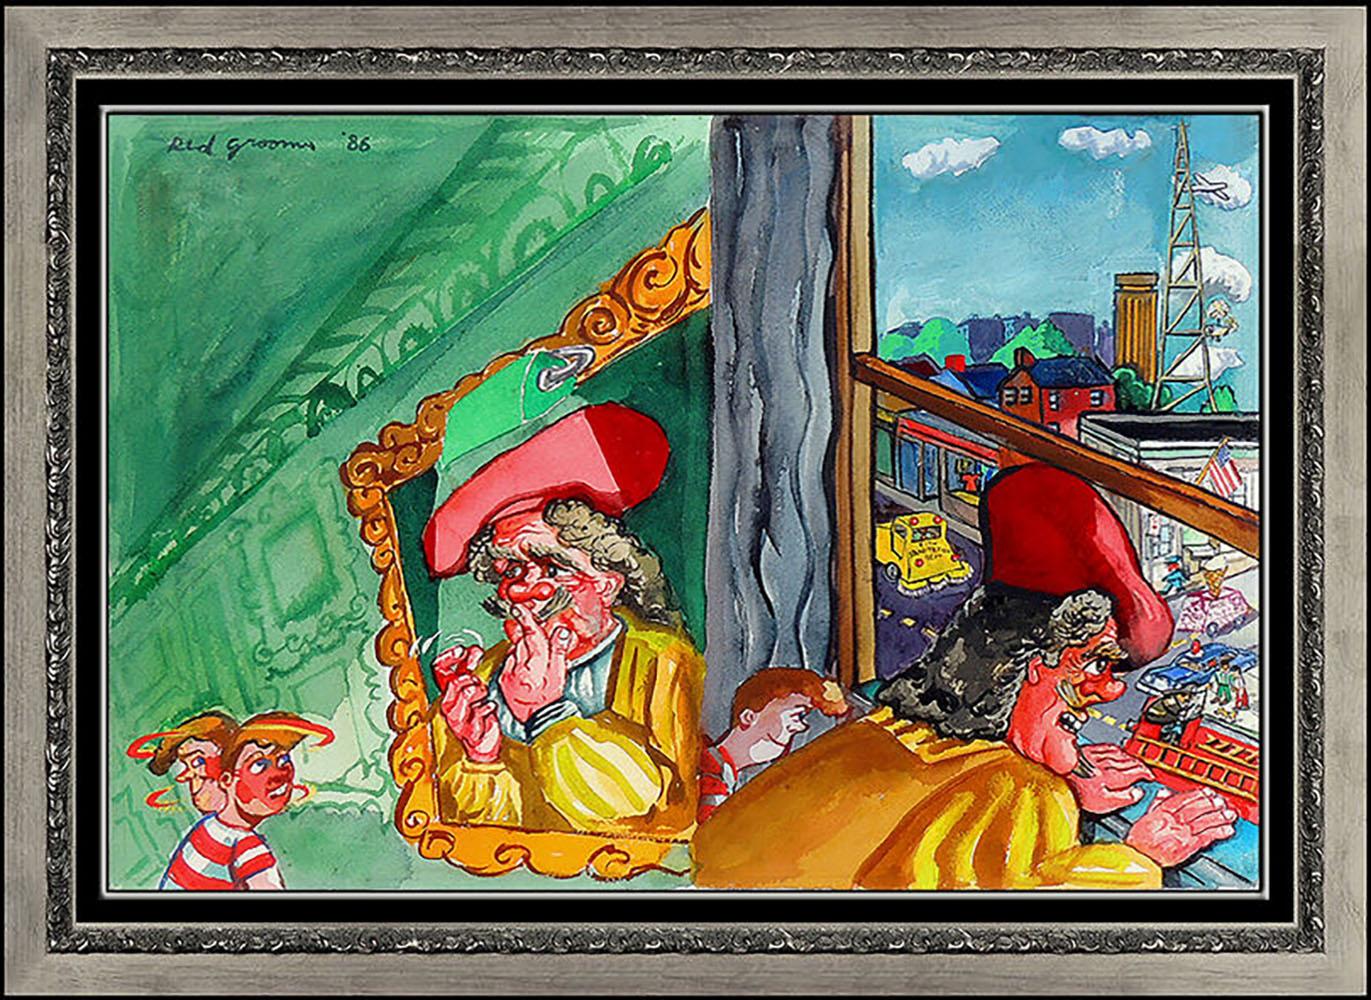 Red Grooms Original Gouache Painting, Professionally Custom Framed and listed with the Submit Best Offer option

Accepting Offers Now: The item up for sale is an Original Gouache Painting by Grooms of that was originally purchased from the